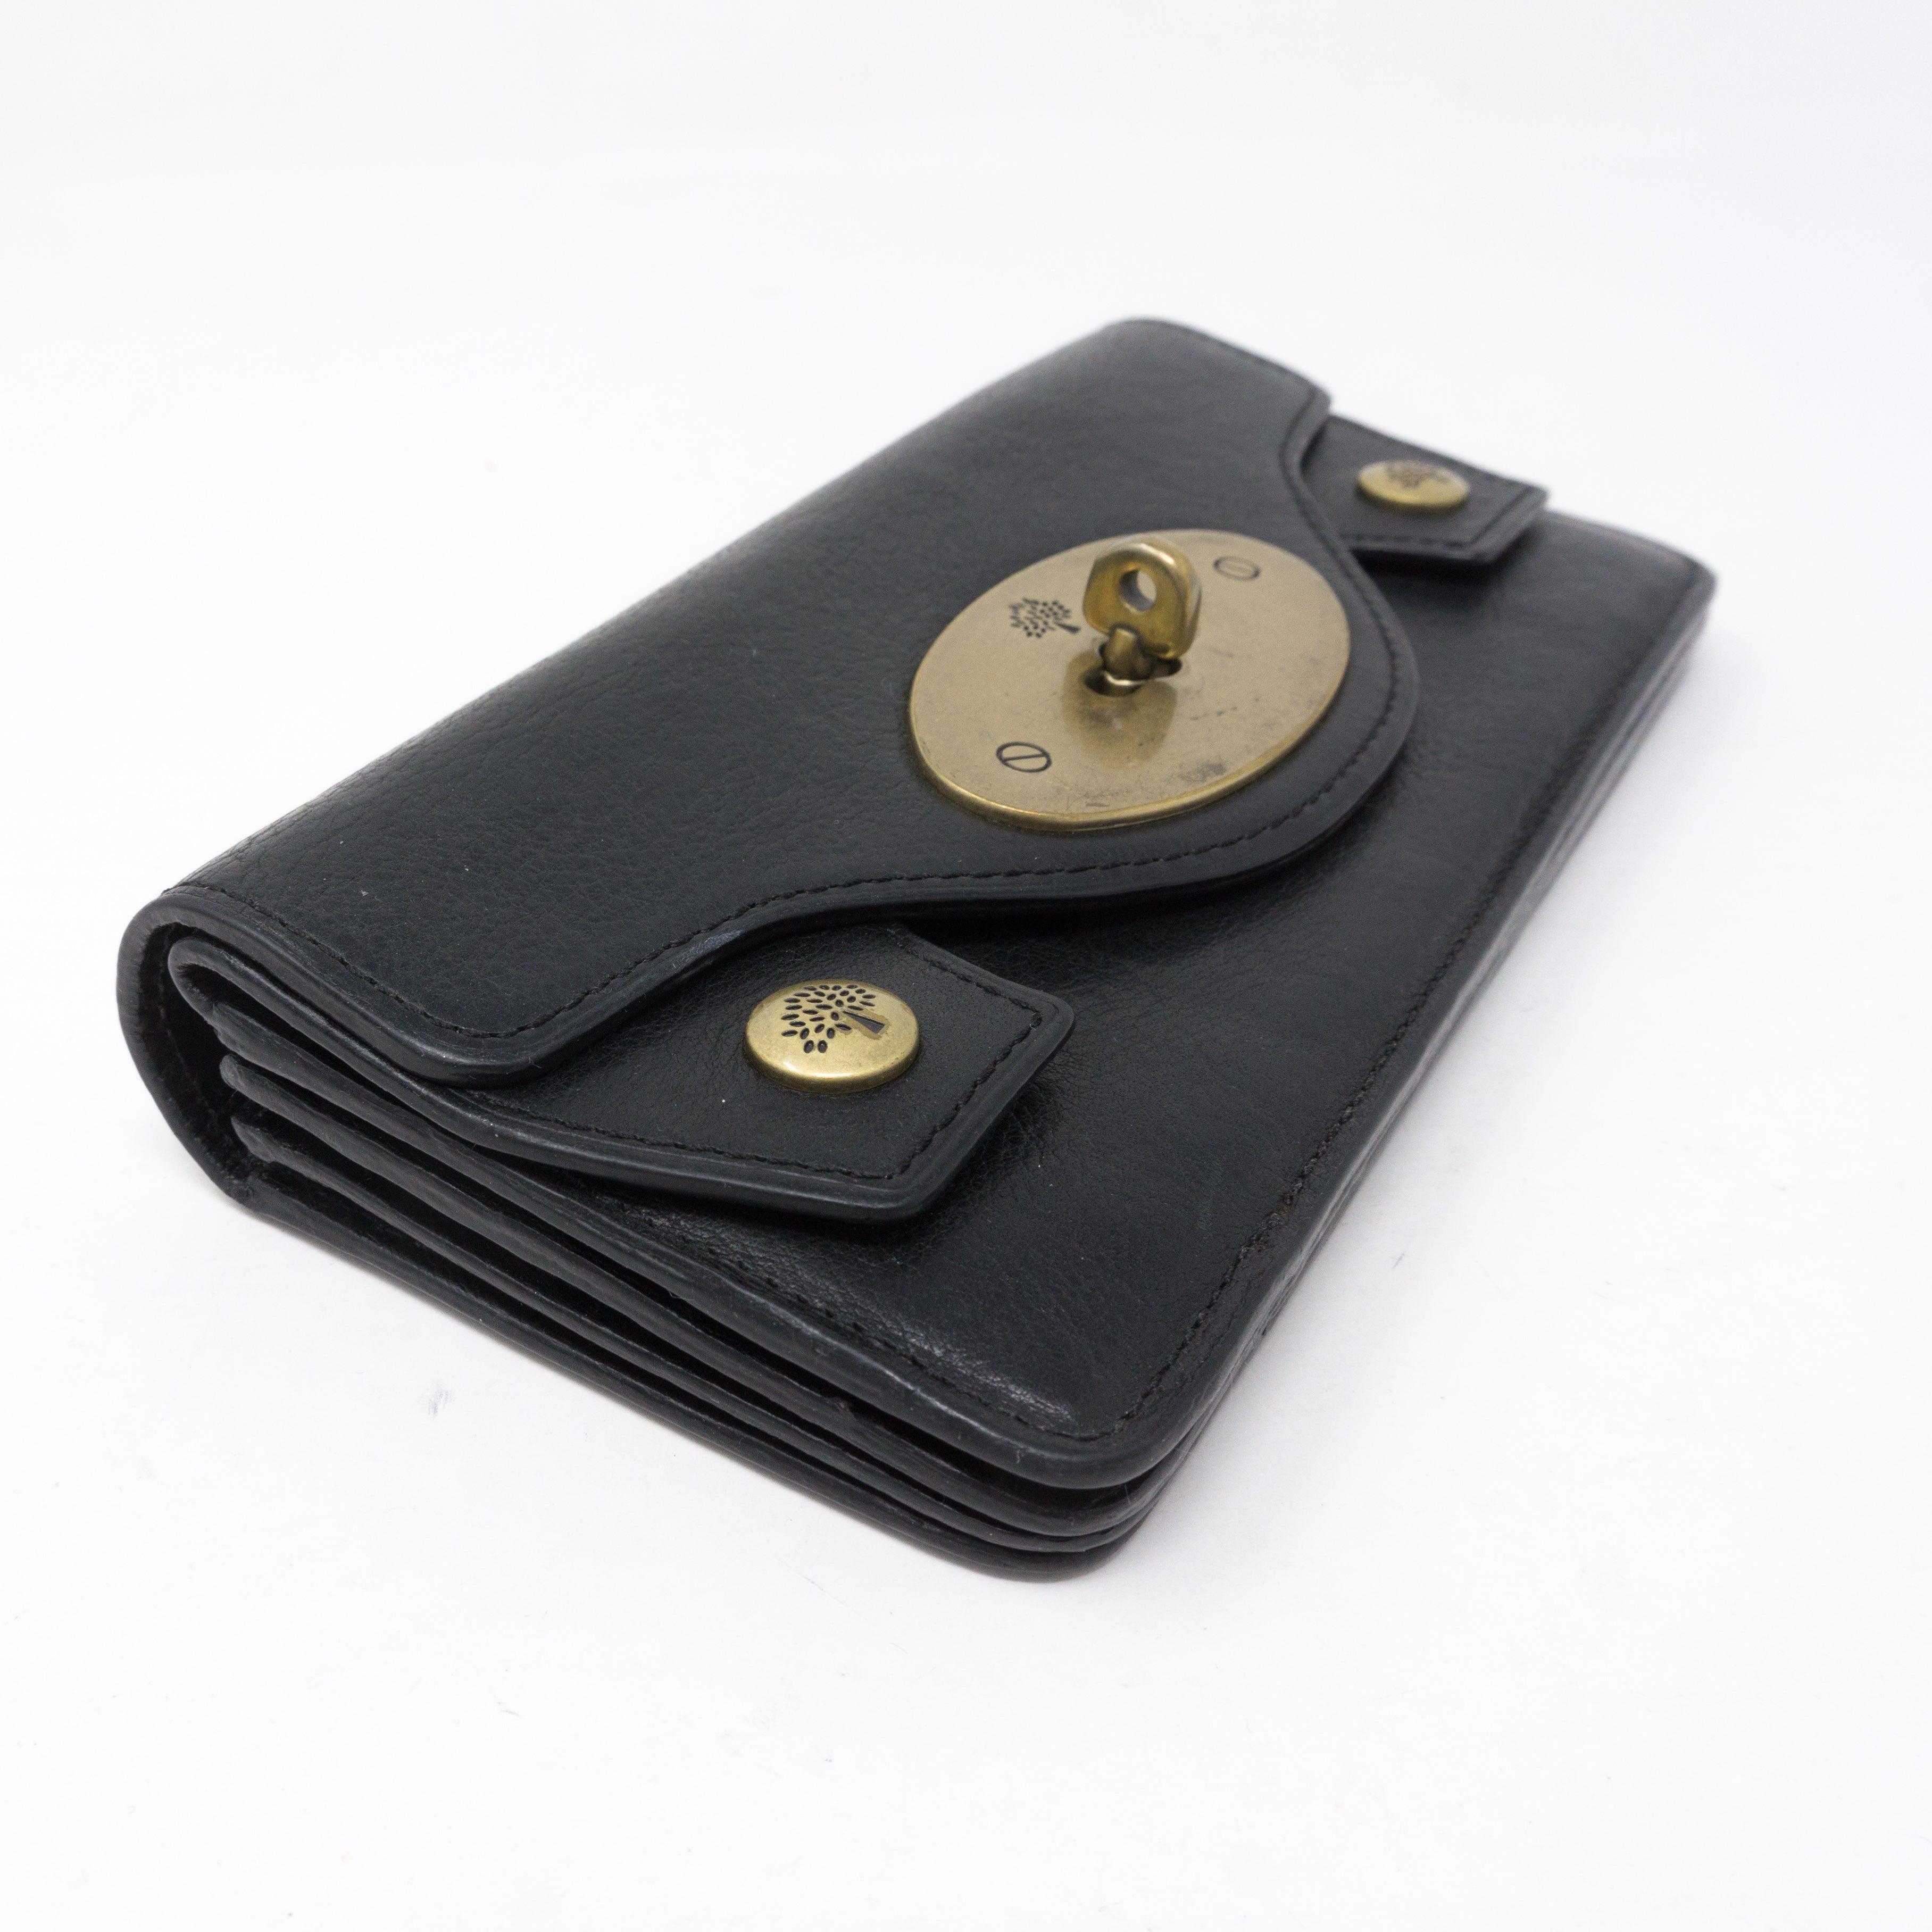 MULBERRY: Darley bag in micro grained leather - Black | MULBERRY mini bag  RL4957205 online at GIGLIO.COM